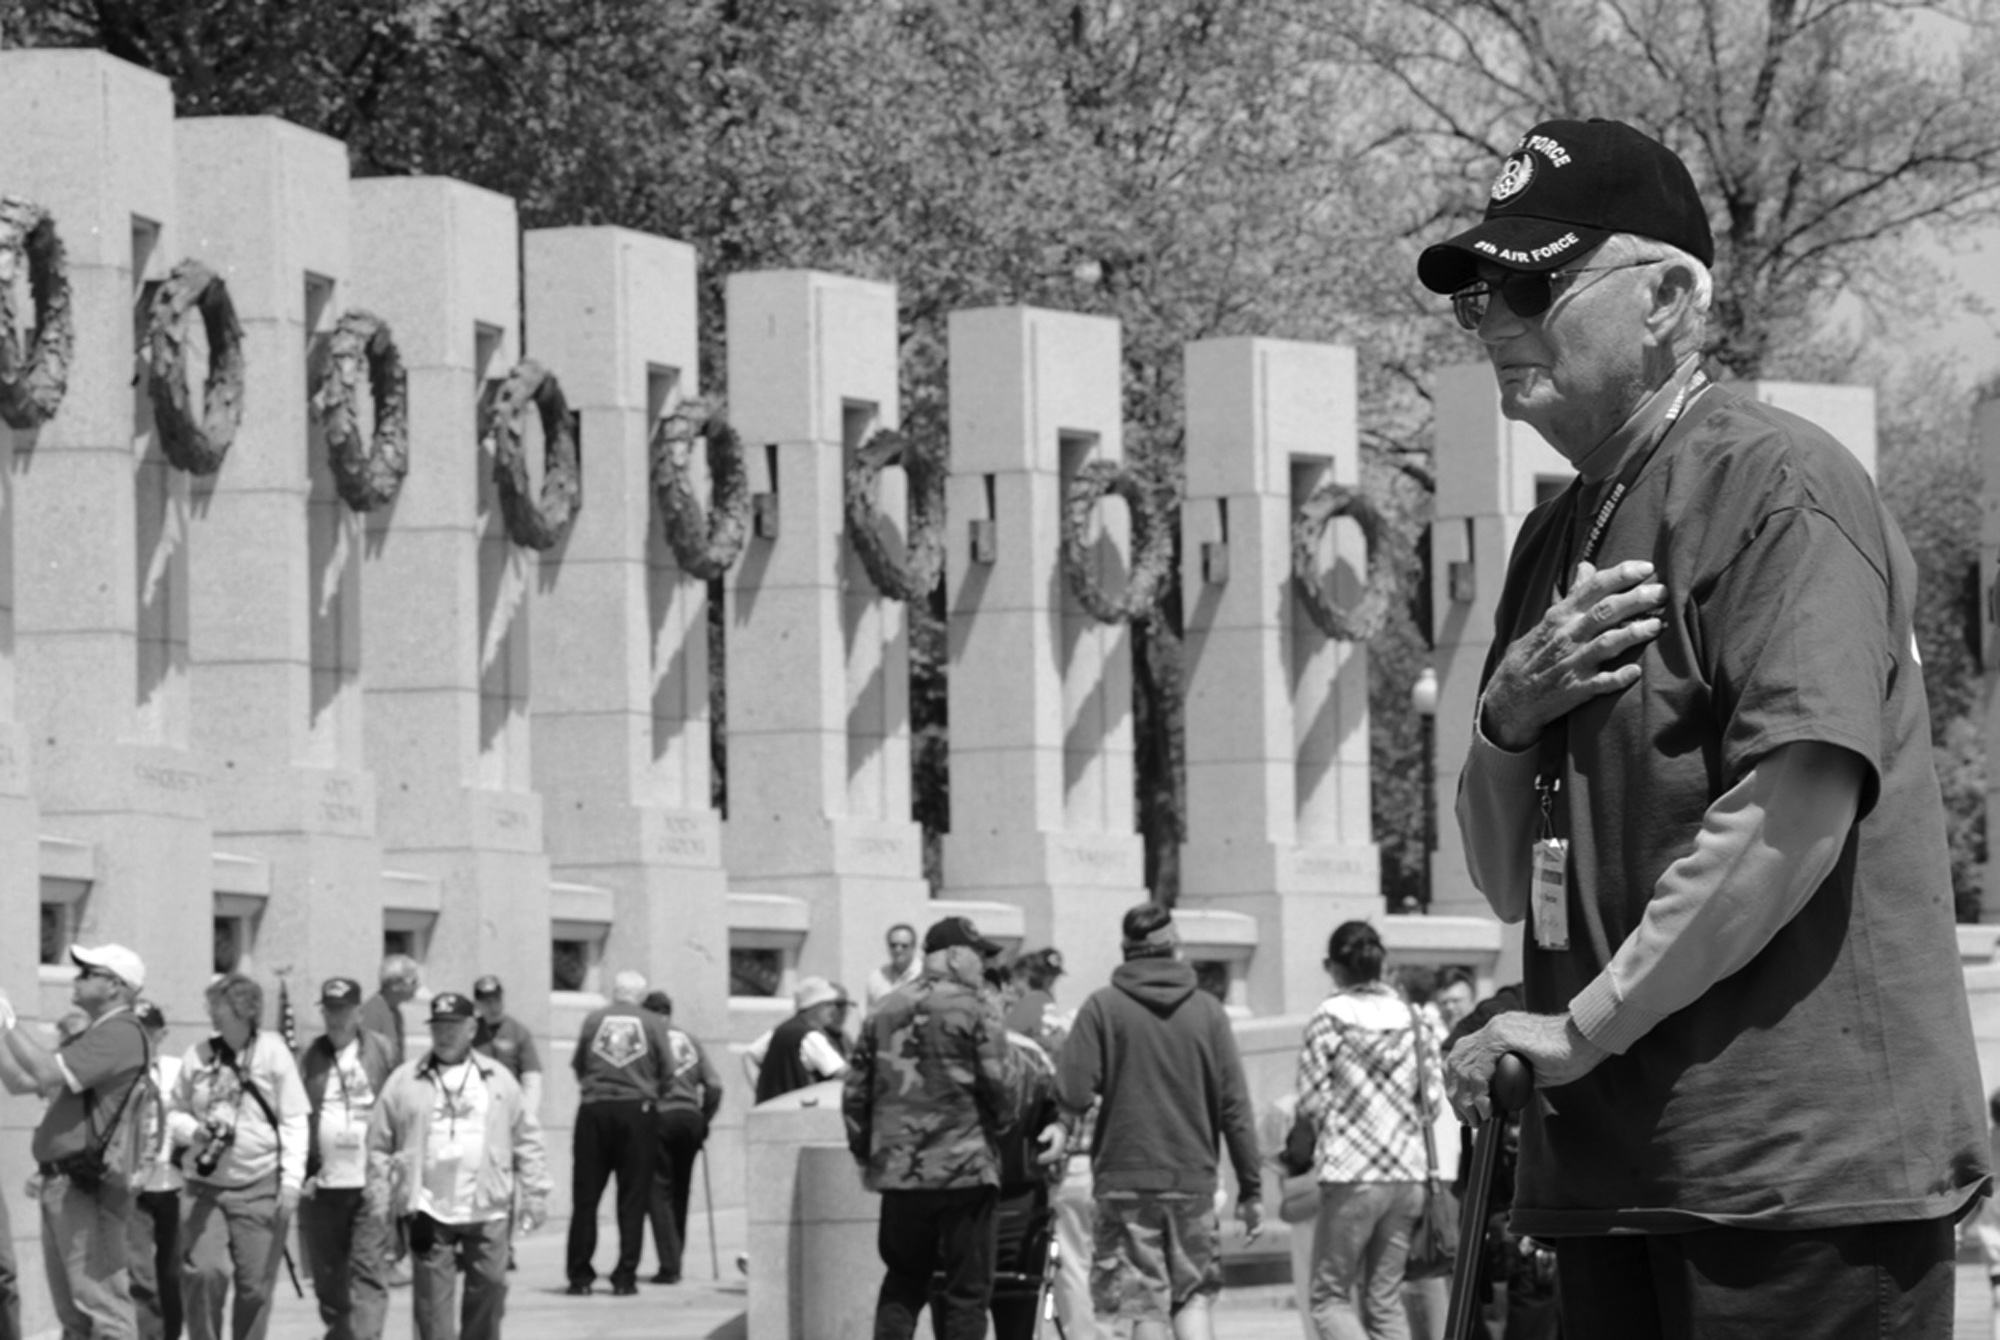  Fred Rector, who served in the army air corps, stands in the World War II Memorial in Washington, D.C., during an Upstate Honor Flight trip on Tuesday, April 20, 2010. Rector was shot down and captured by the Germans in Europe during the war. 